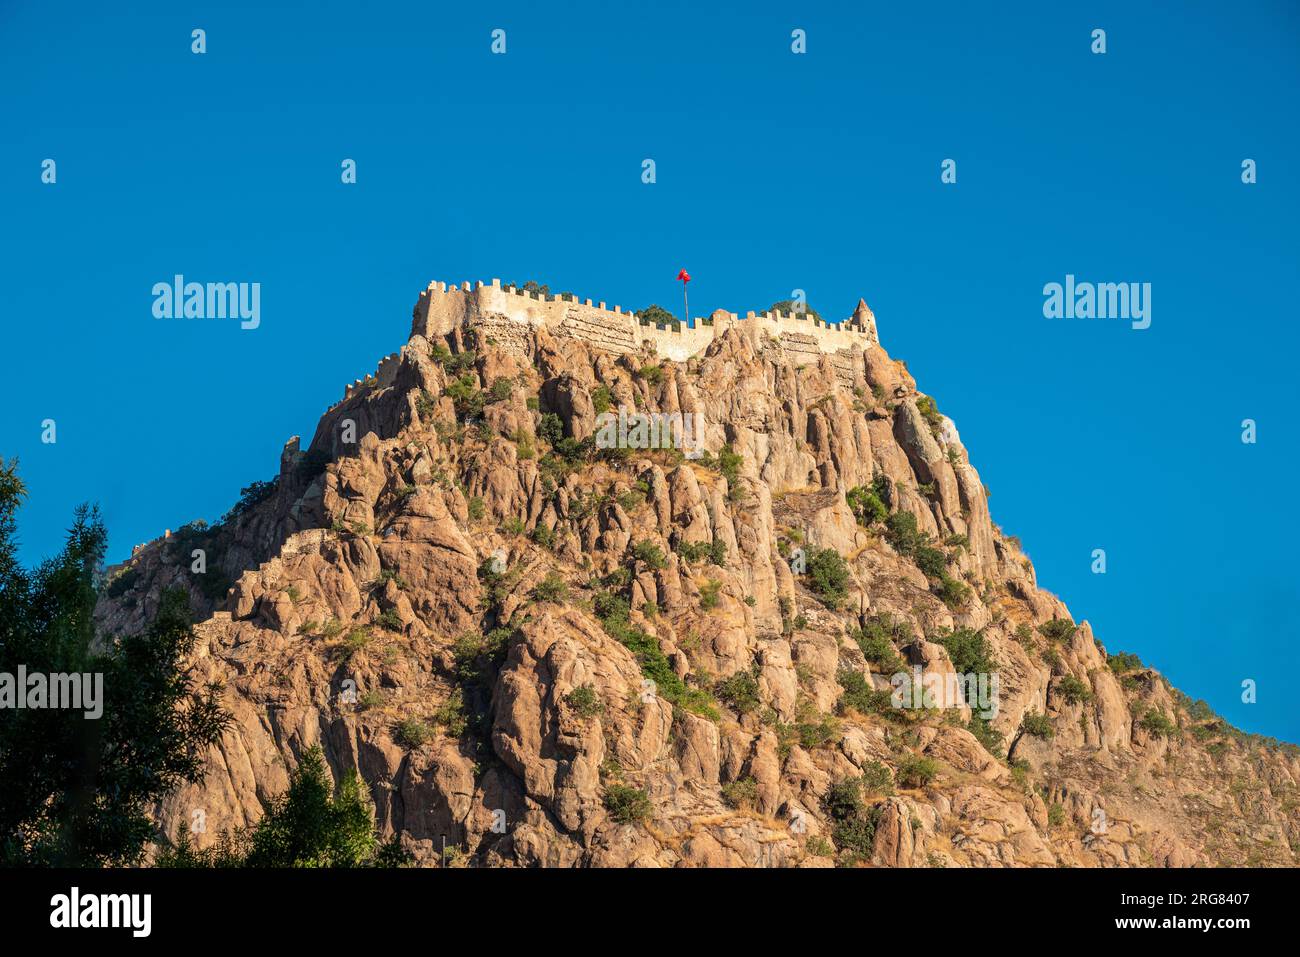 Afyon castle on the rock in Afyonkarahisar Turkey in front of a sunny blue sky Stock Photo